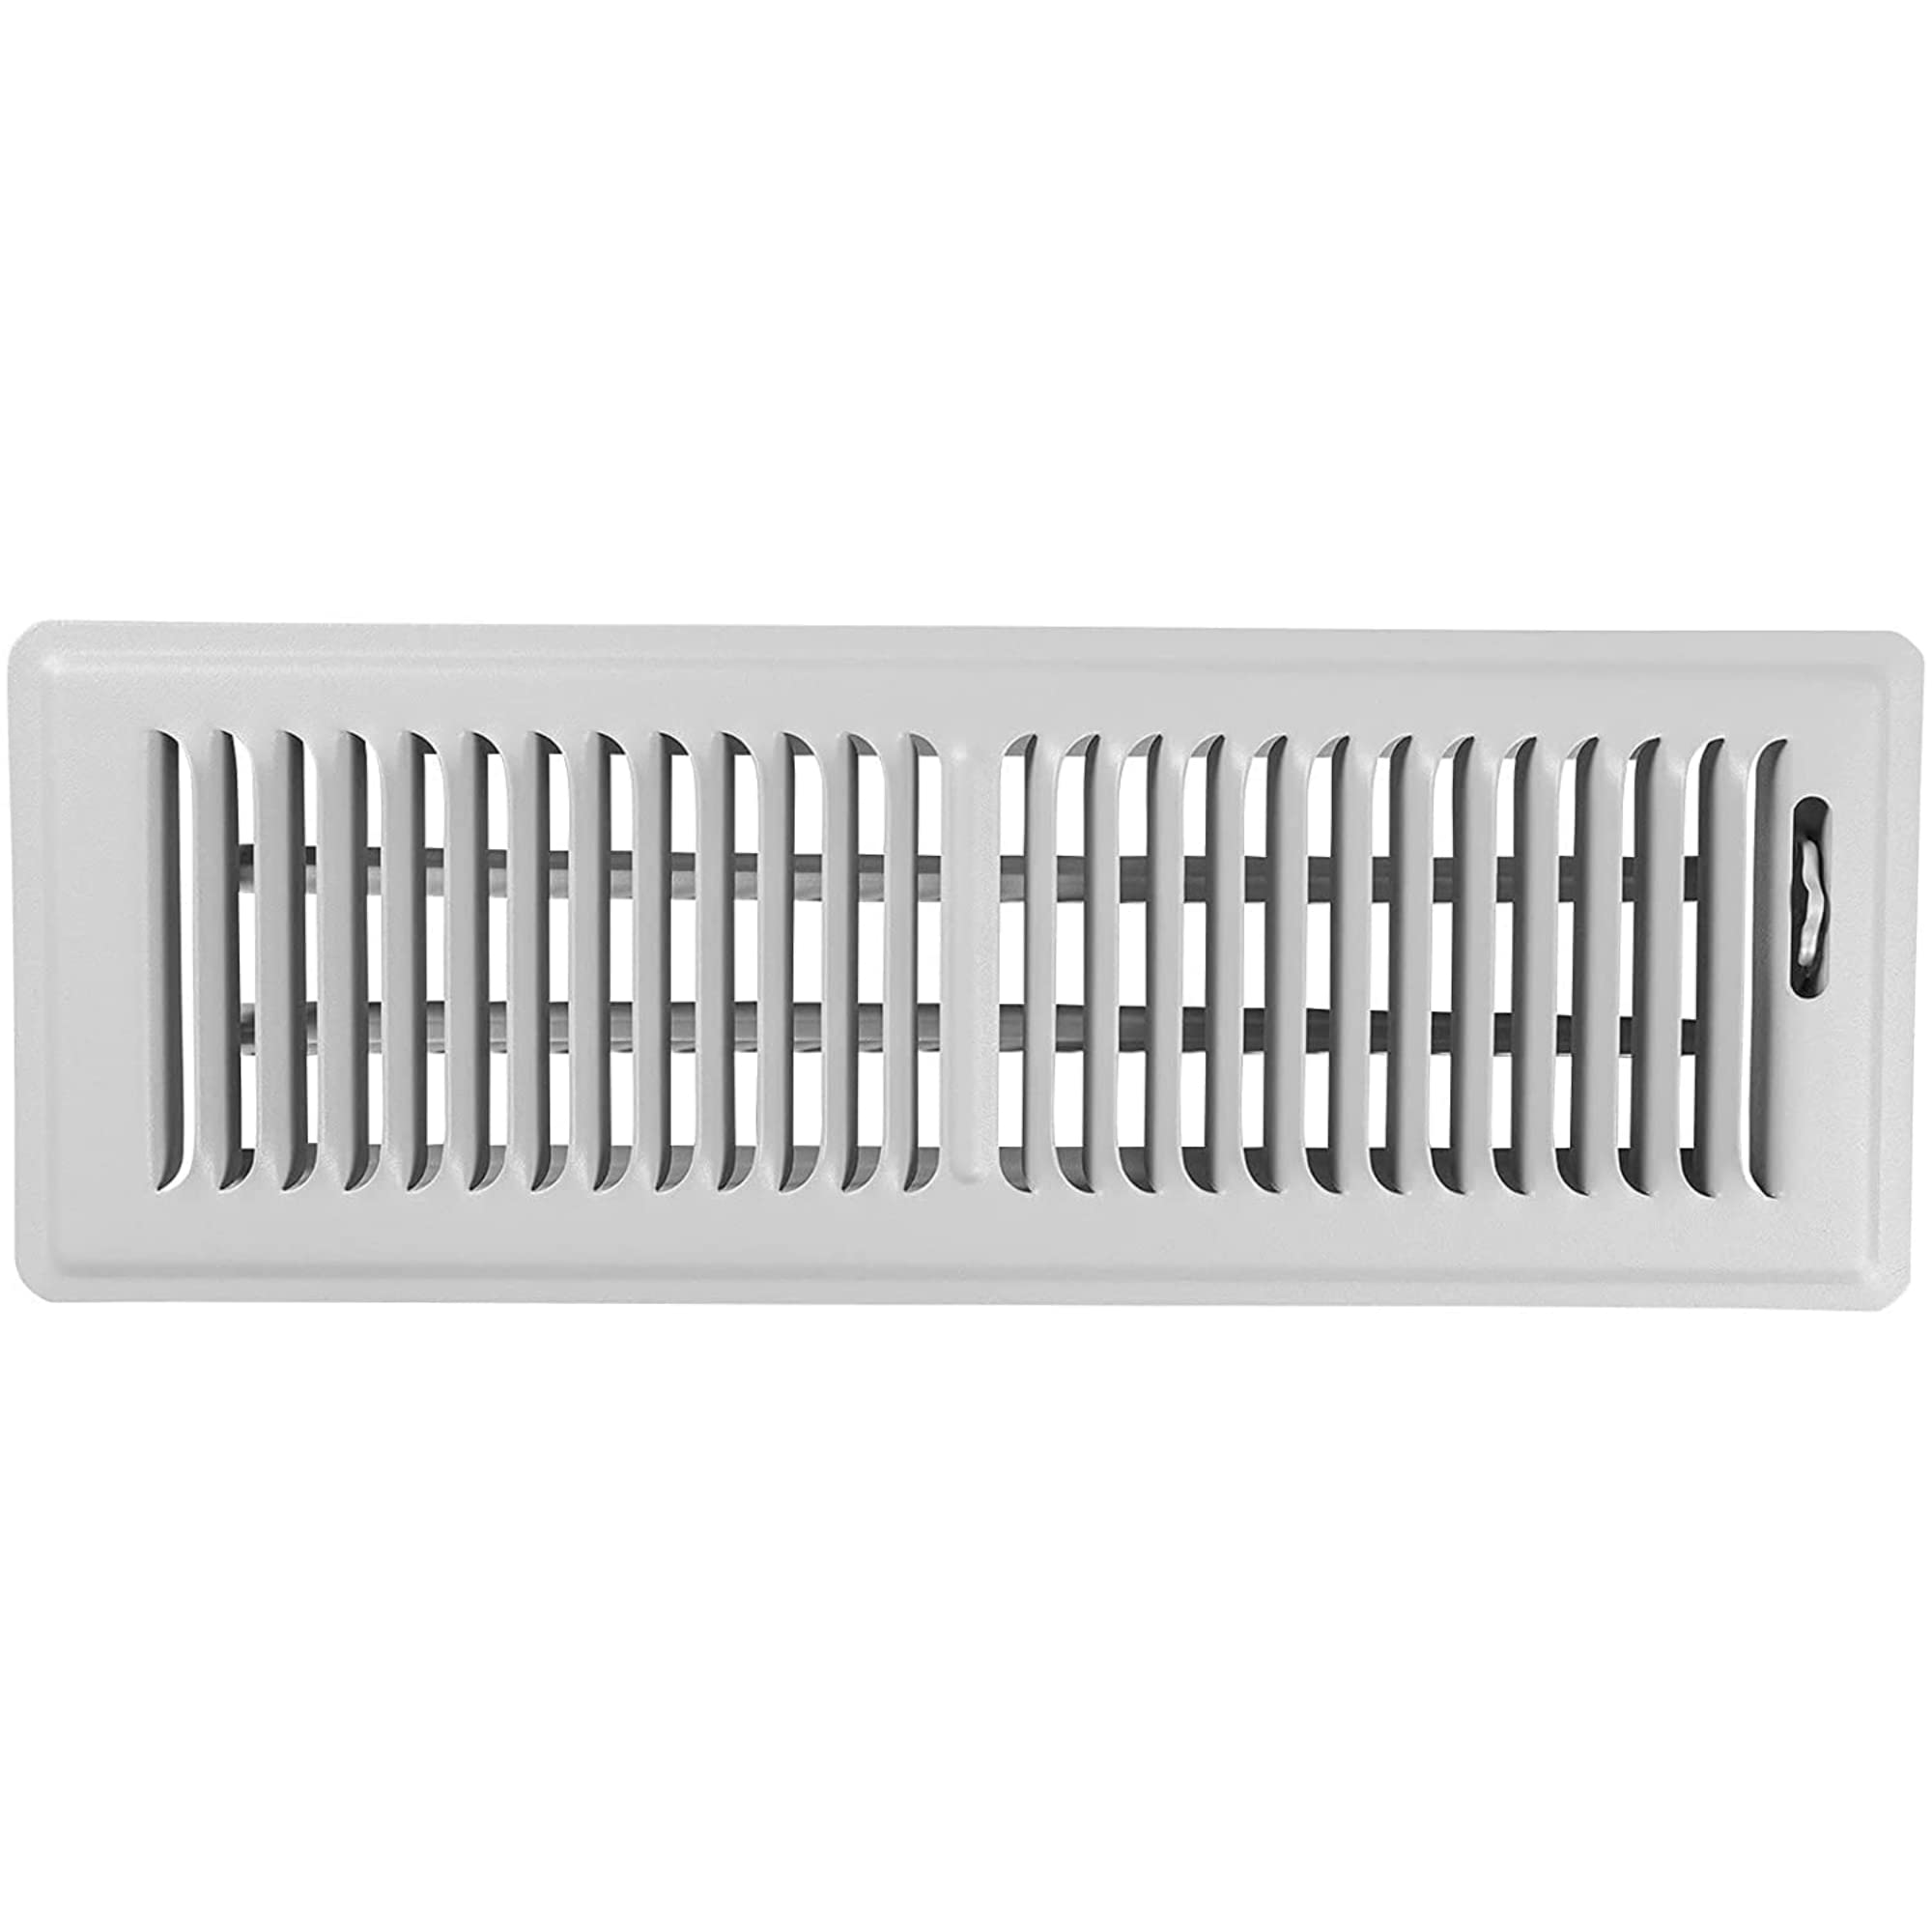 Shoemaker Manufacturing, cement gray, 4x14, Premium Floor Register, All Steel Heavy Duty Vent cover